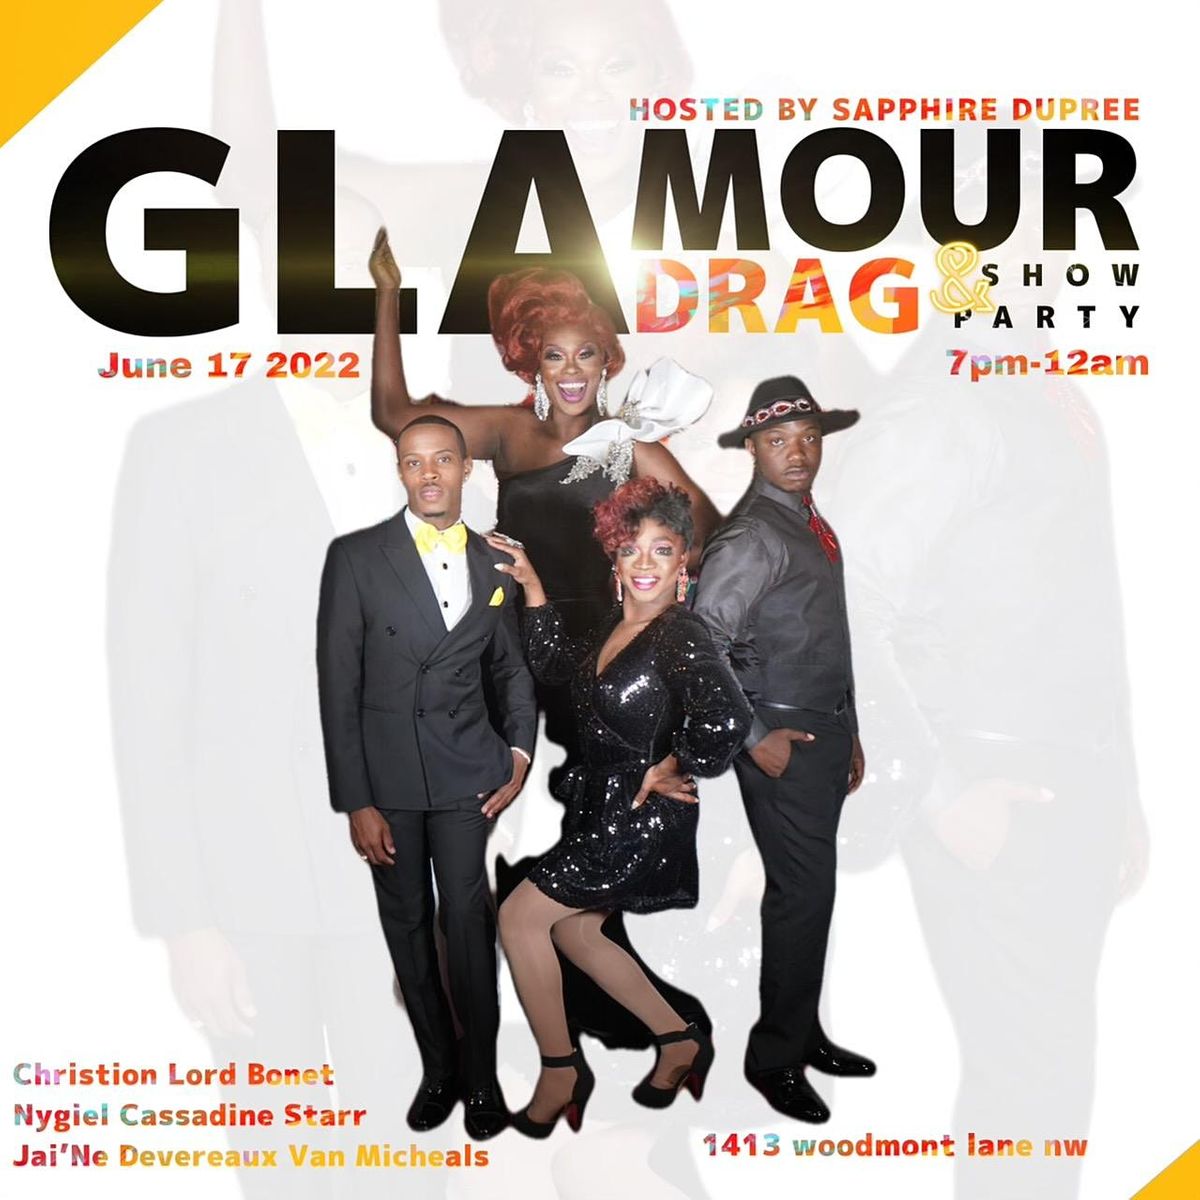 Glamour Drag show and party is going to have the hottest most talented drag